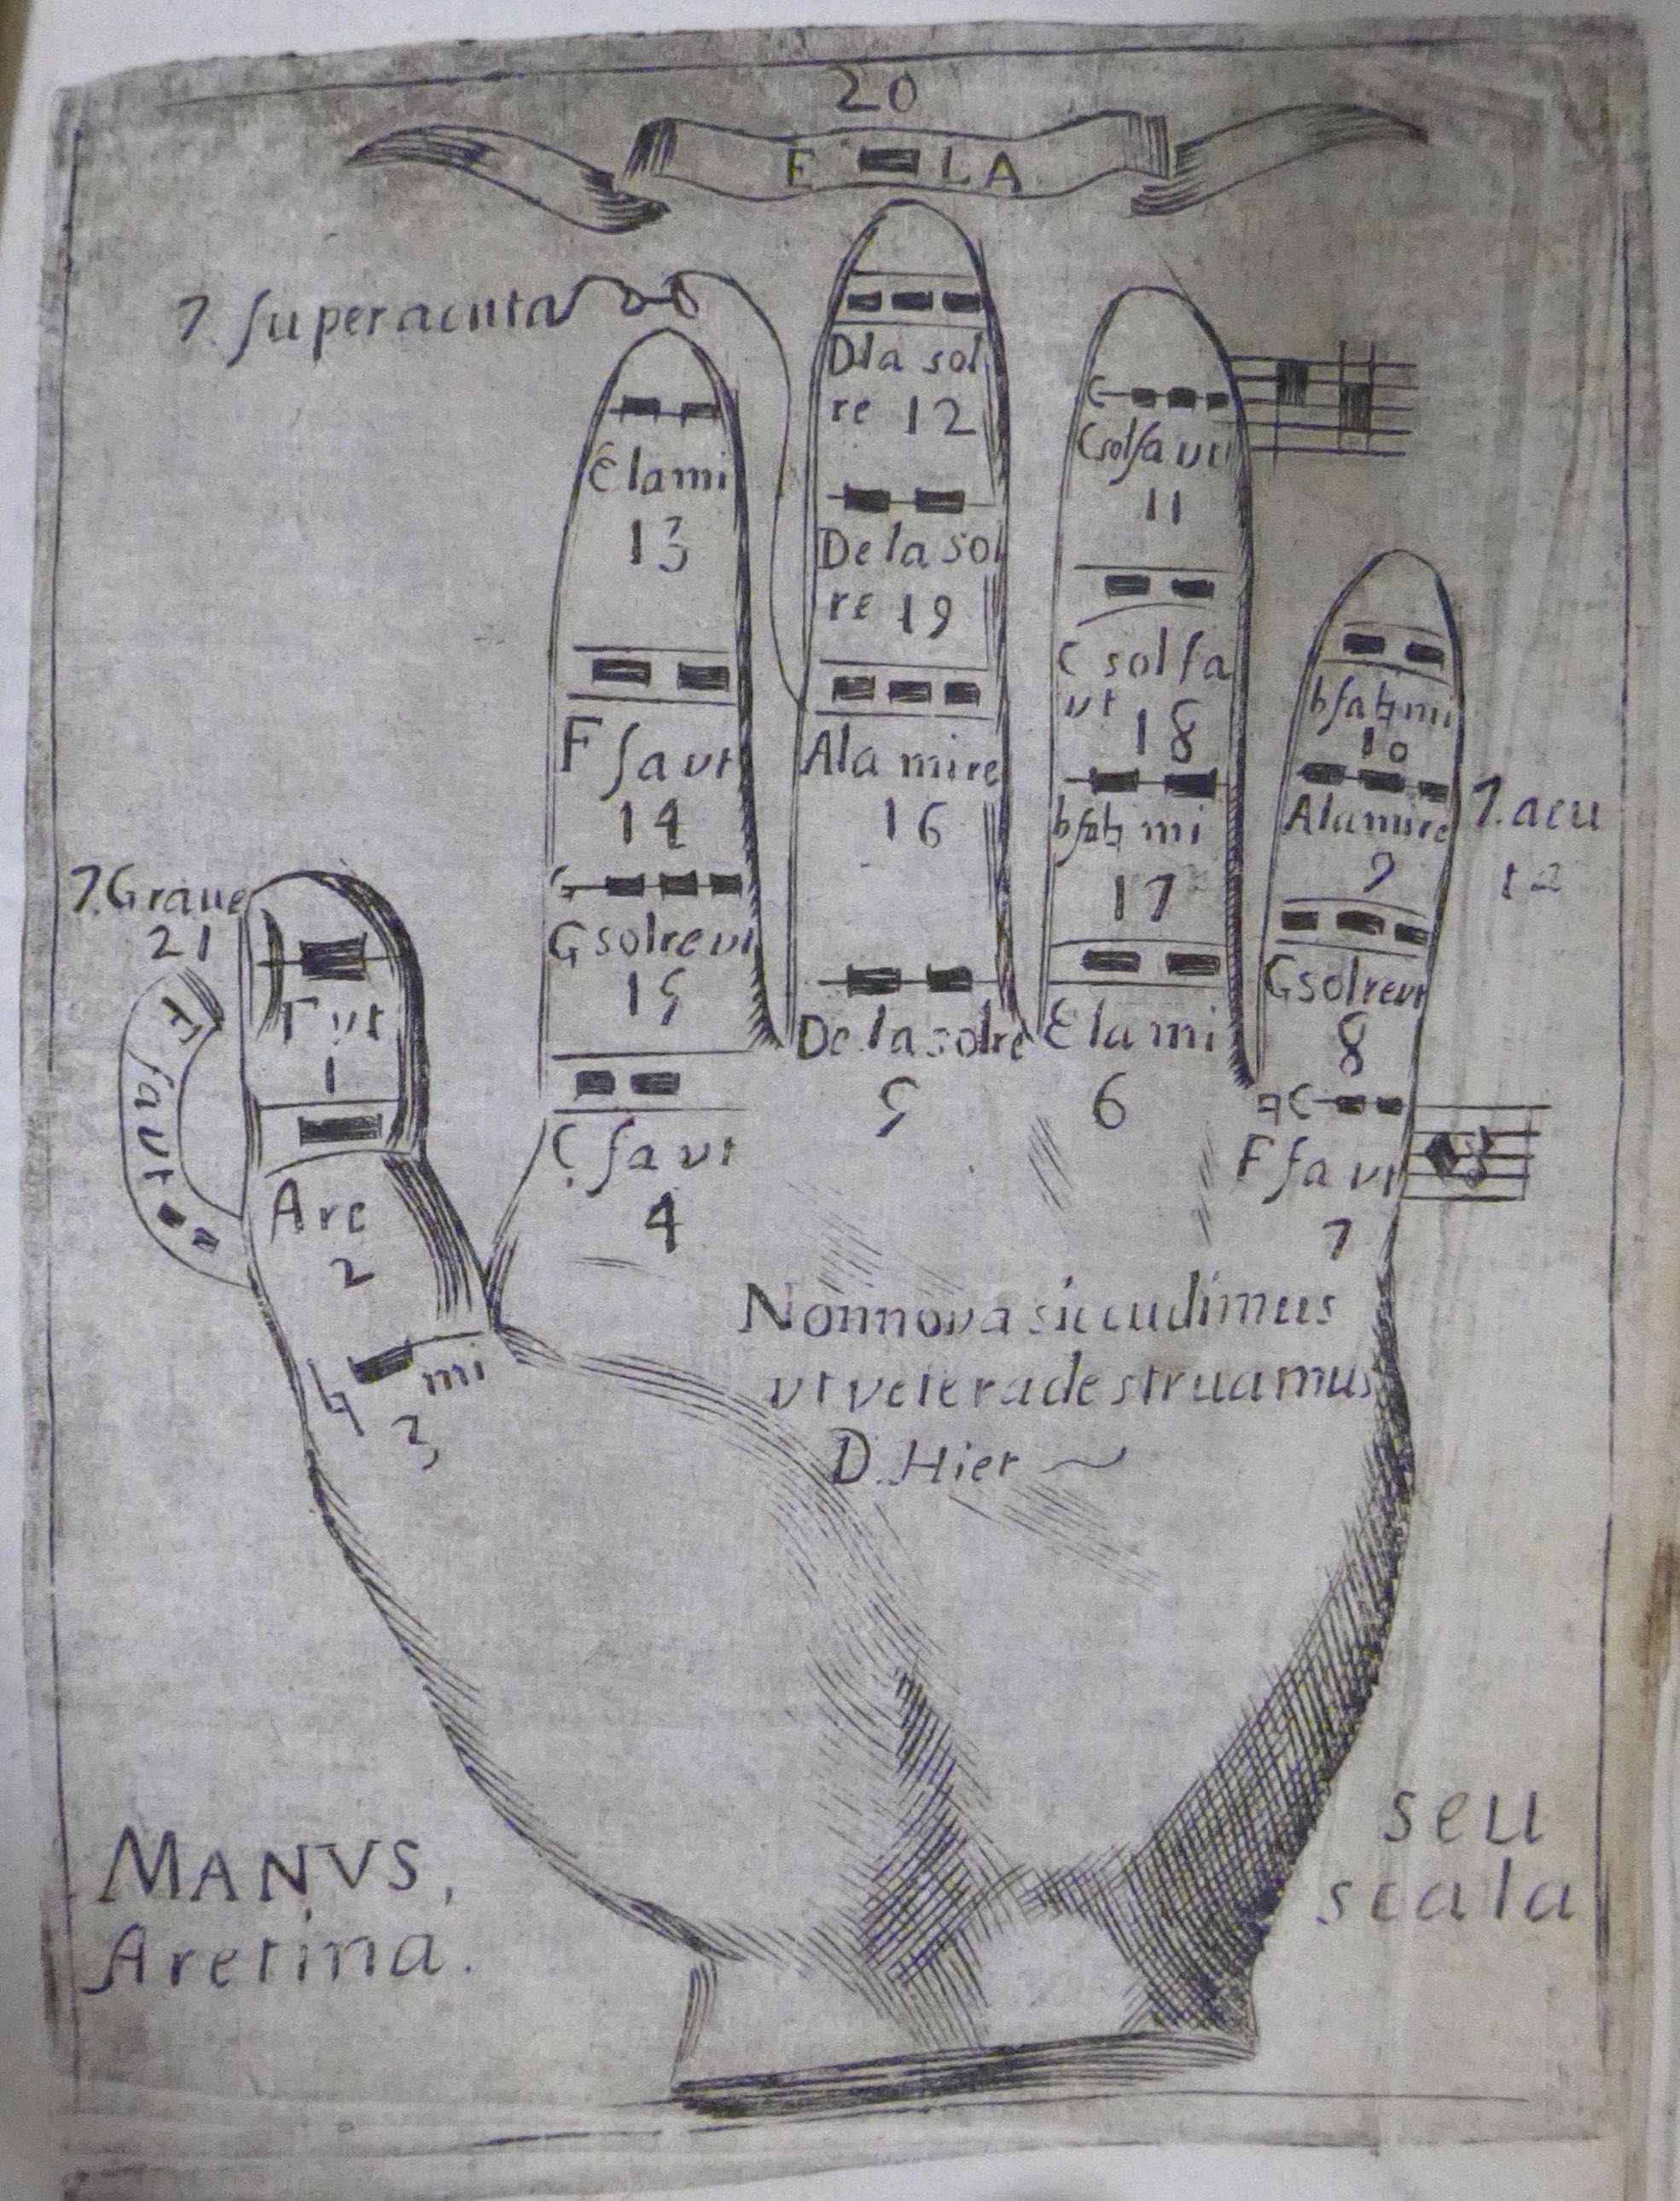 The Guidonian hand, a mnemonic device used by Guido de Arezzo to teach music in the 11th c., formed part of the toolkit of Franciscan missionaries in the Americas. Manuel Sánchez included this example to teach plainsong in his Rule of St Francis (Mexico City, 1725).